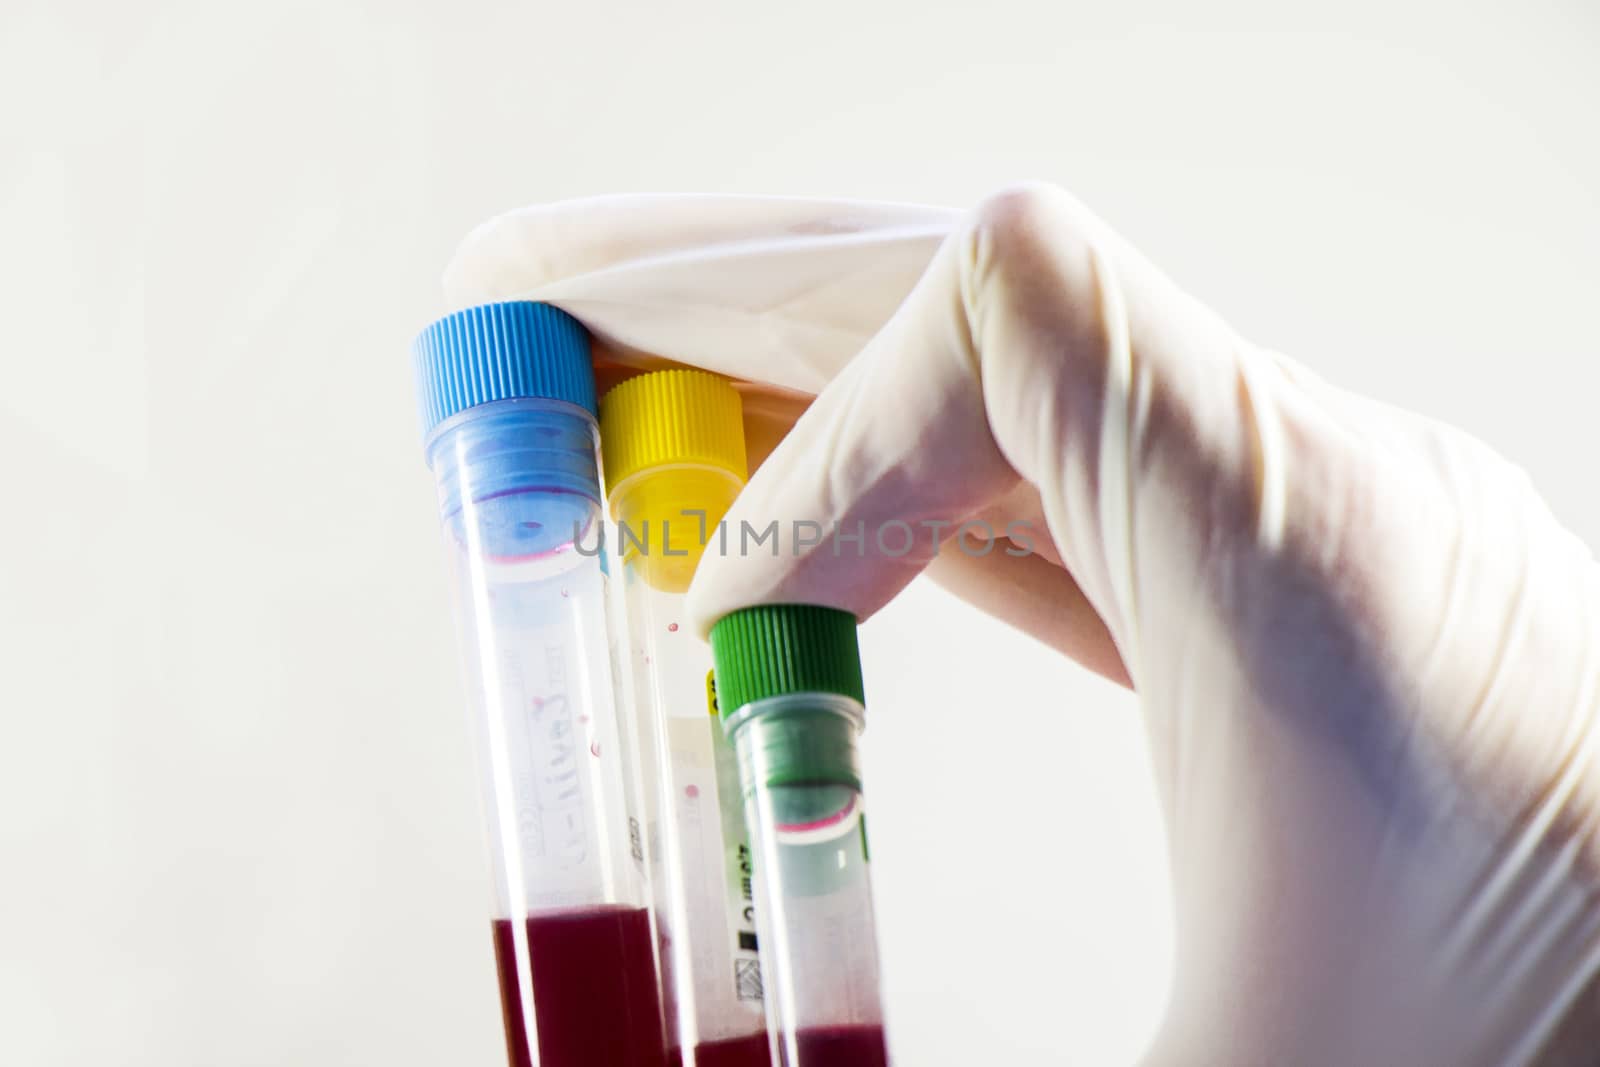 Blood test tubes in doctor hand and glove on the white background, studio shoot. by Taidundua